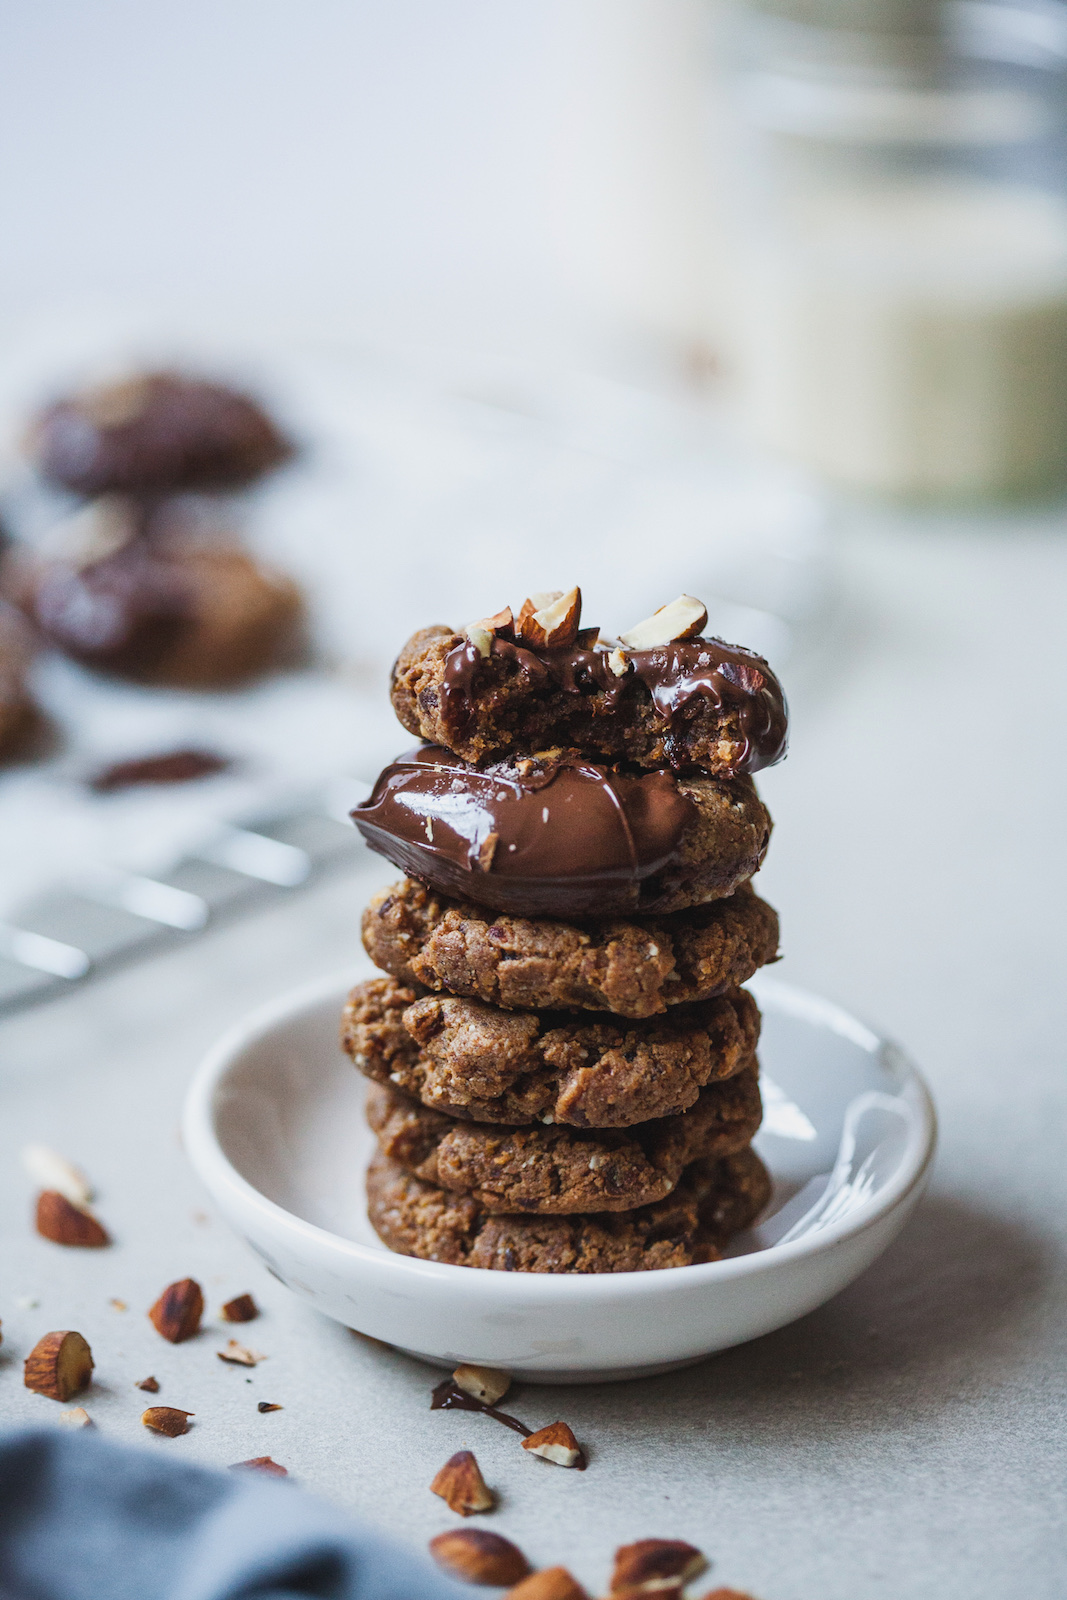 Chocolate Dipped Almond Butter Cookies